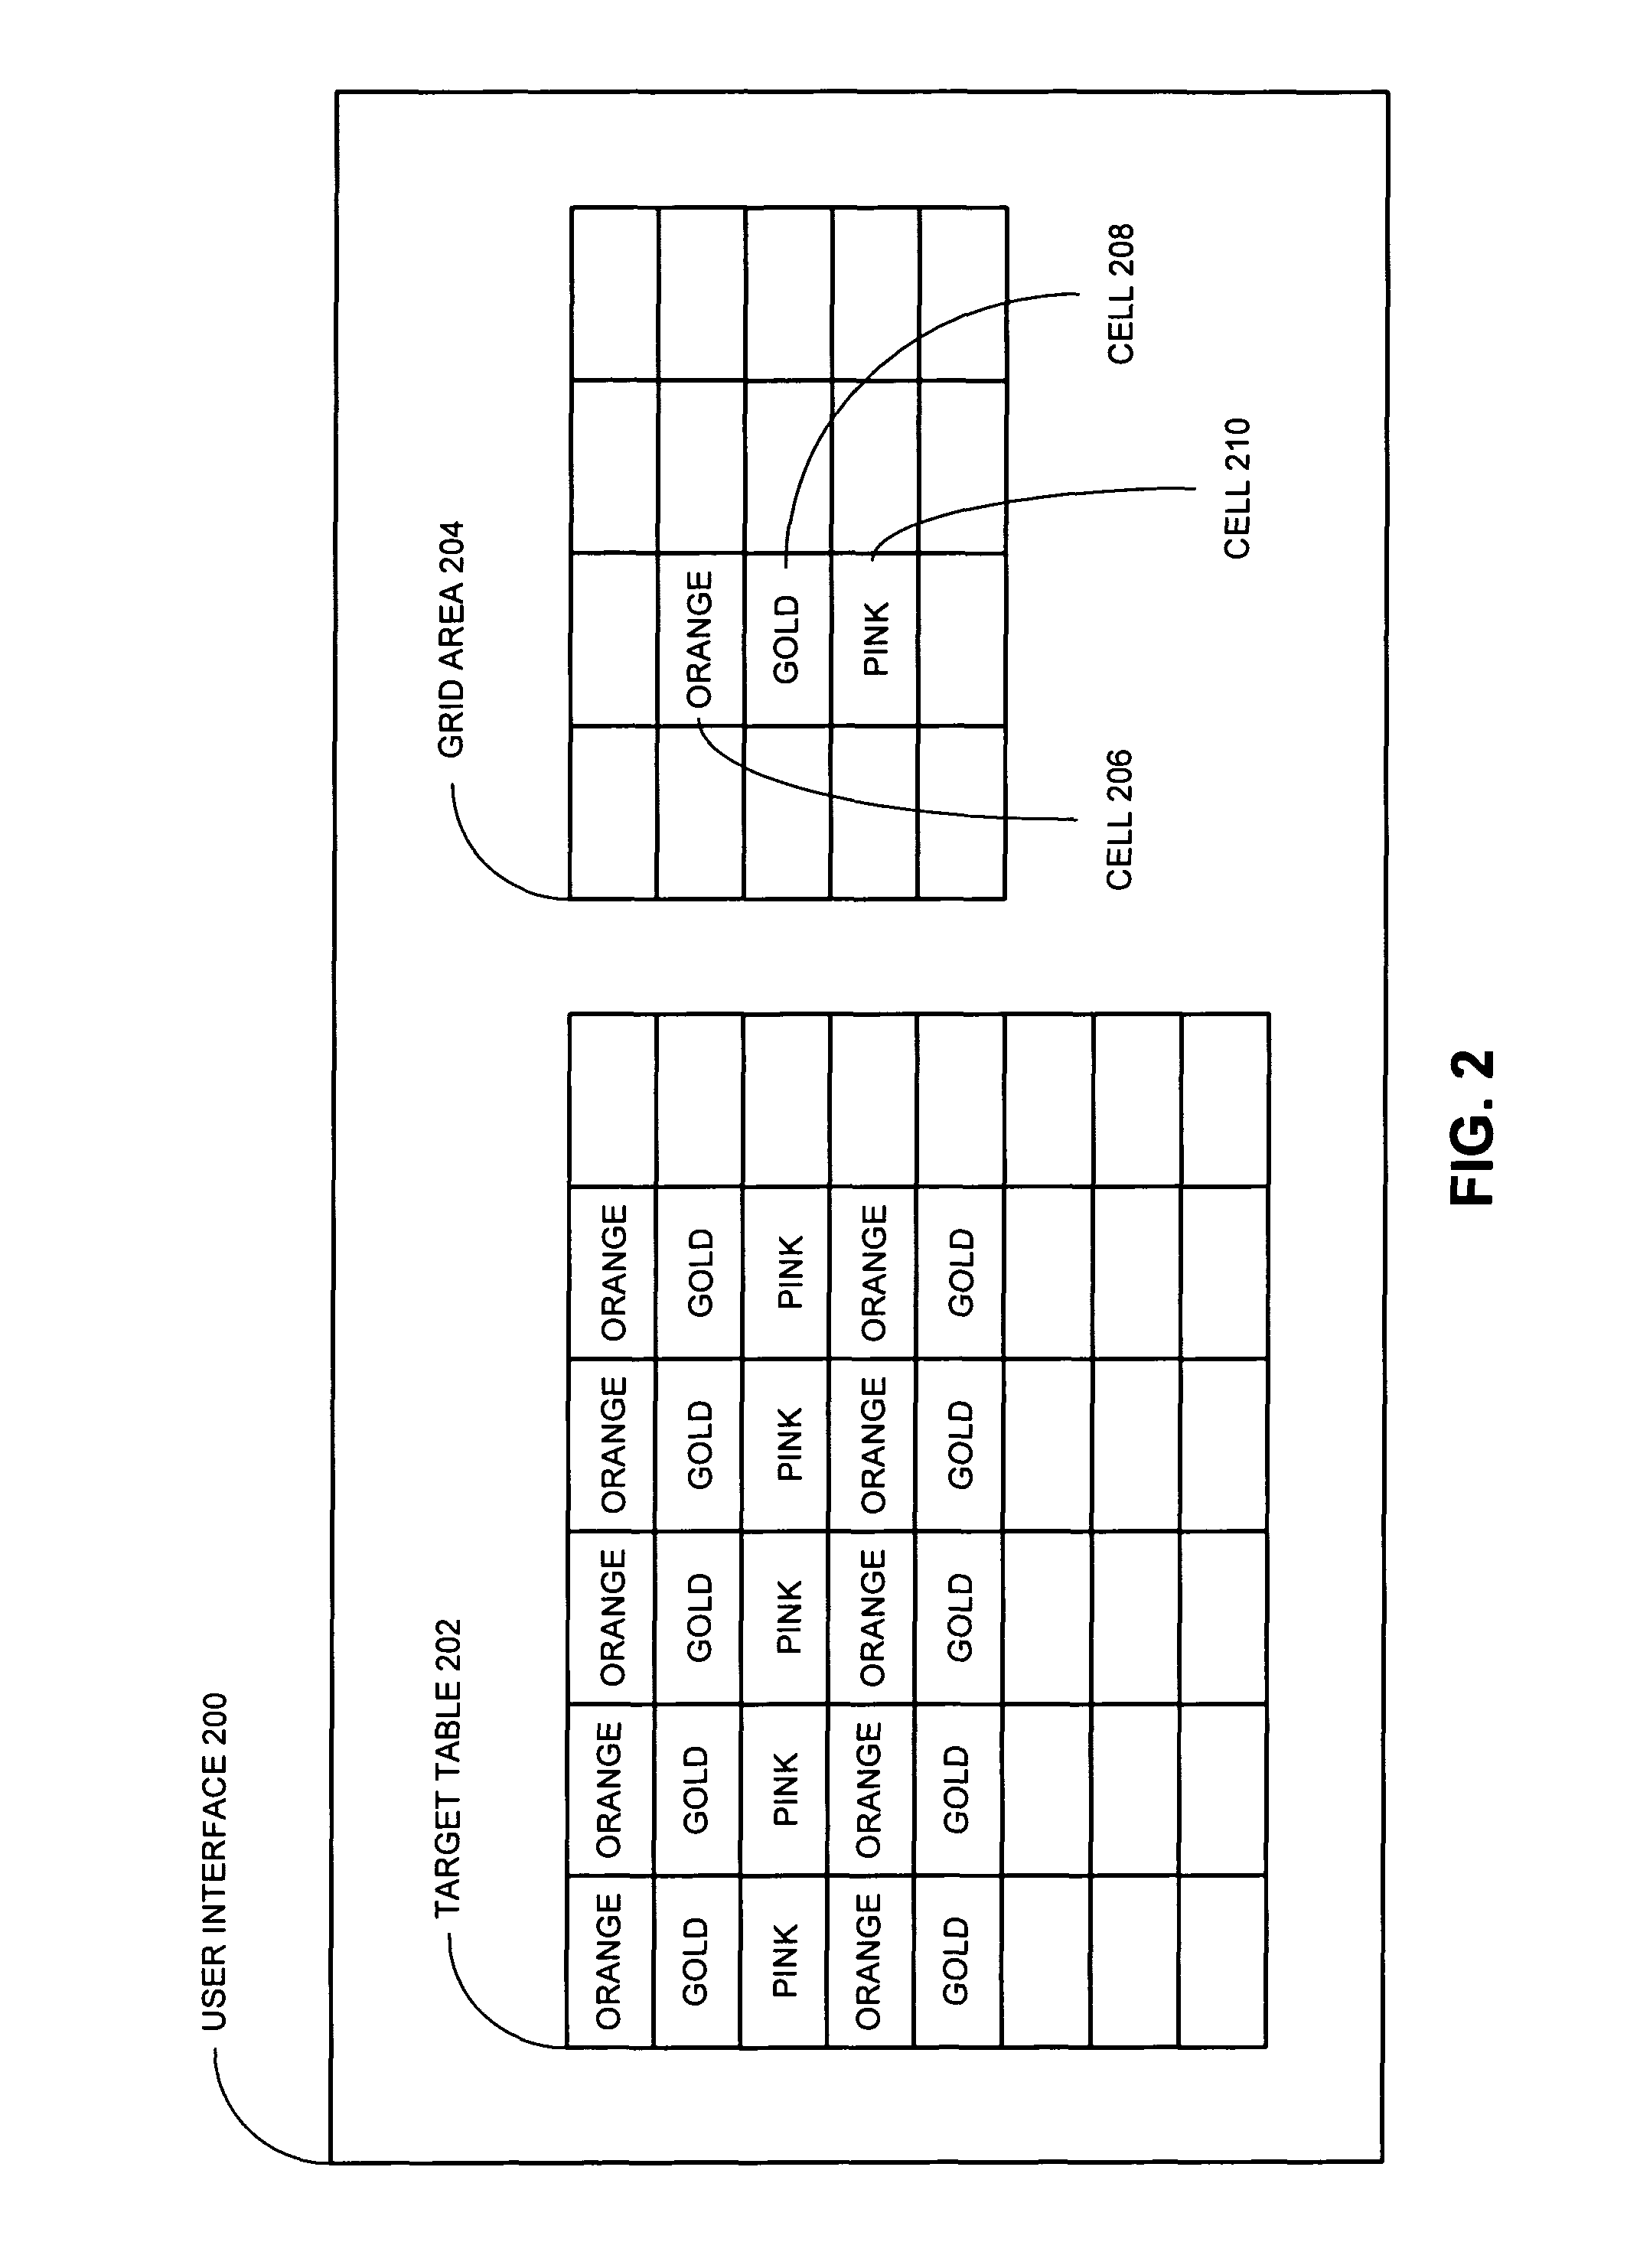 Method and apparatus for defining table styles